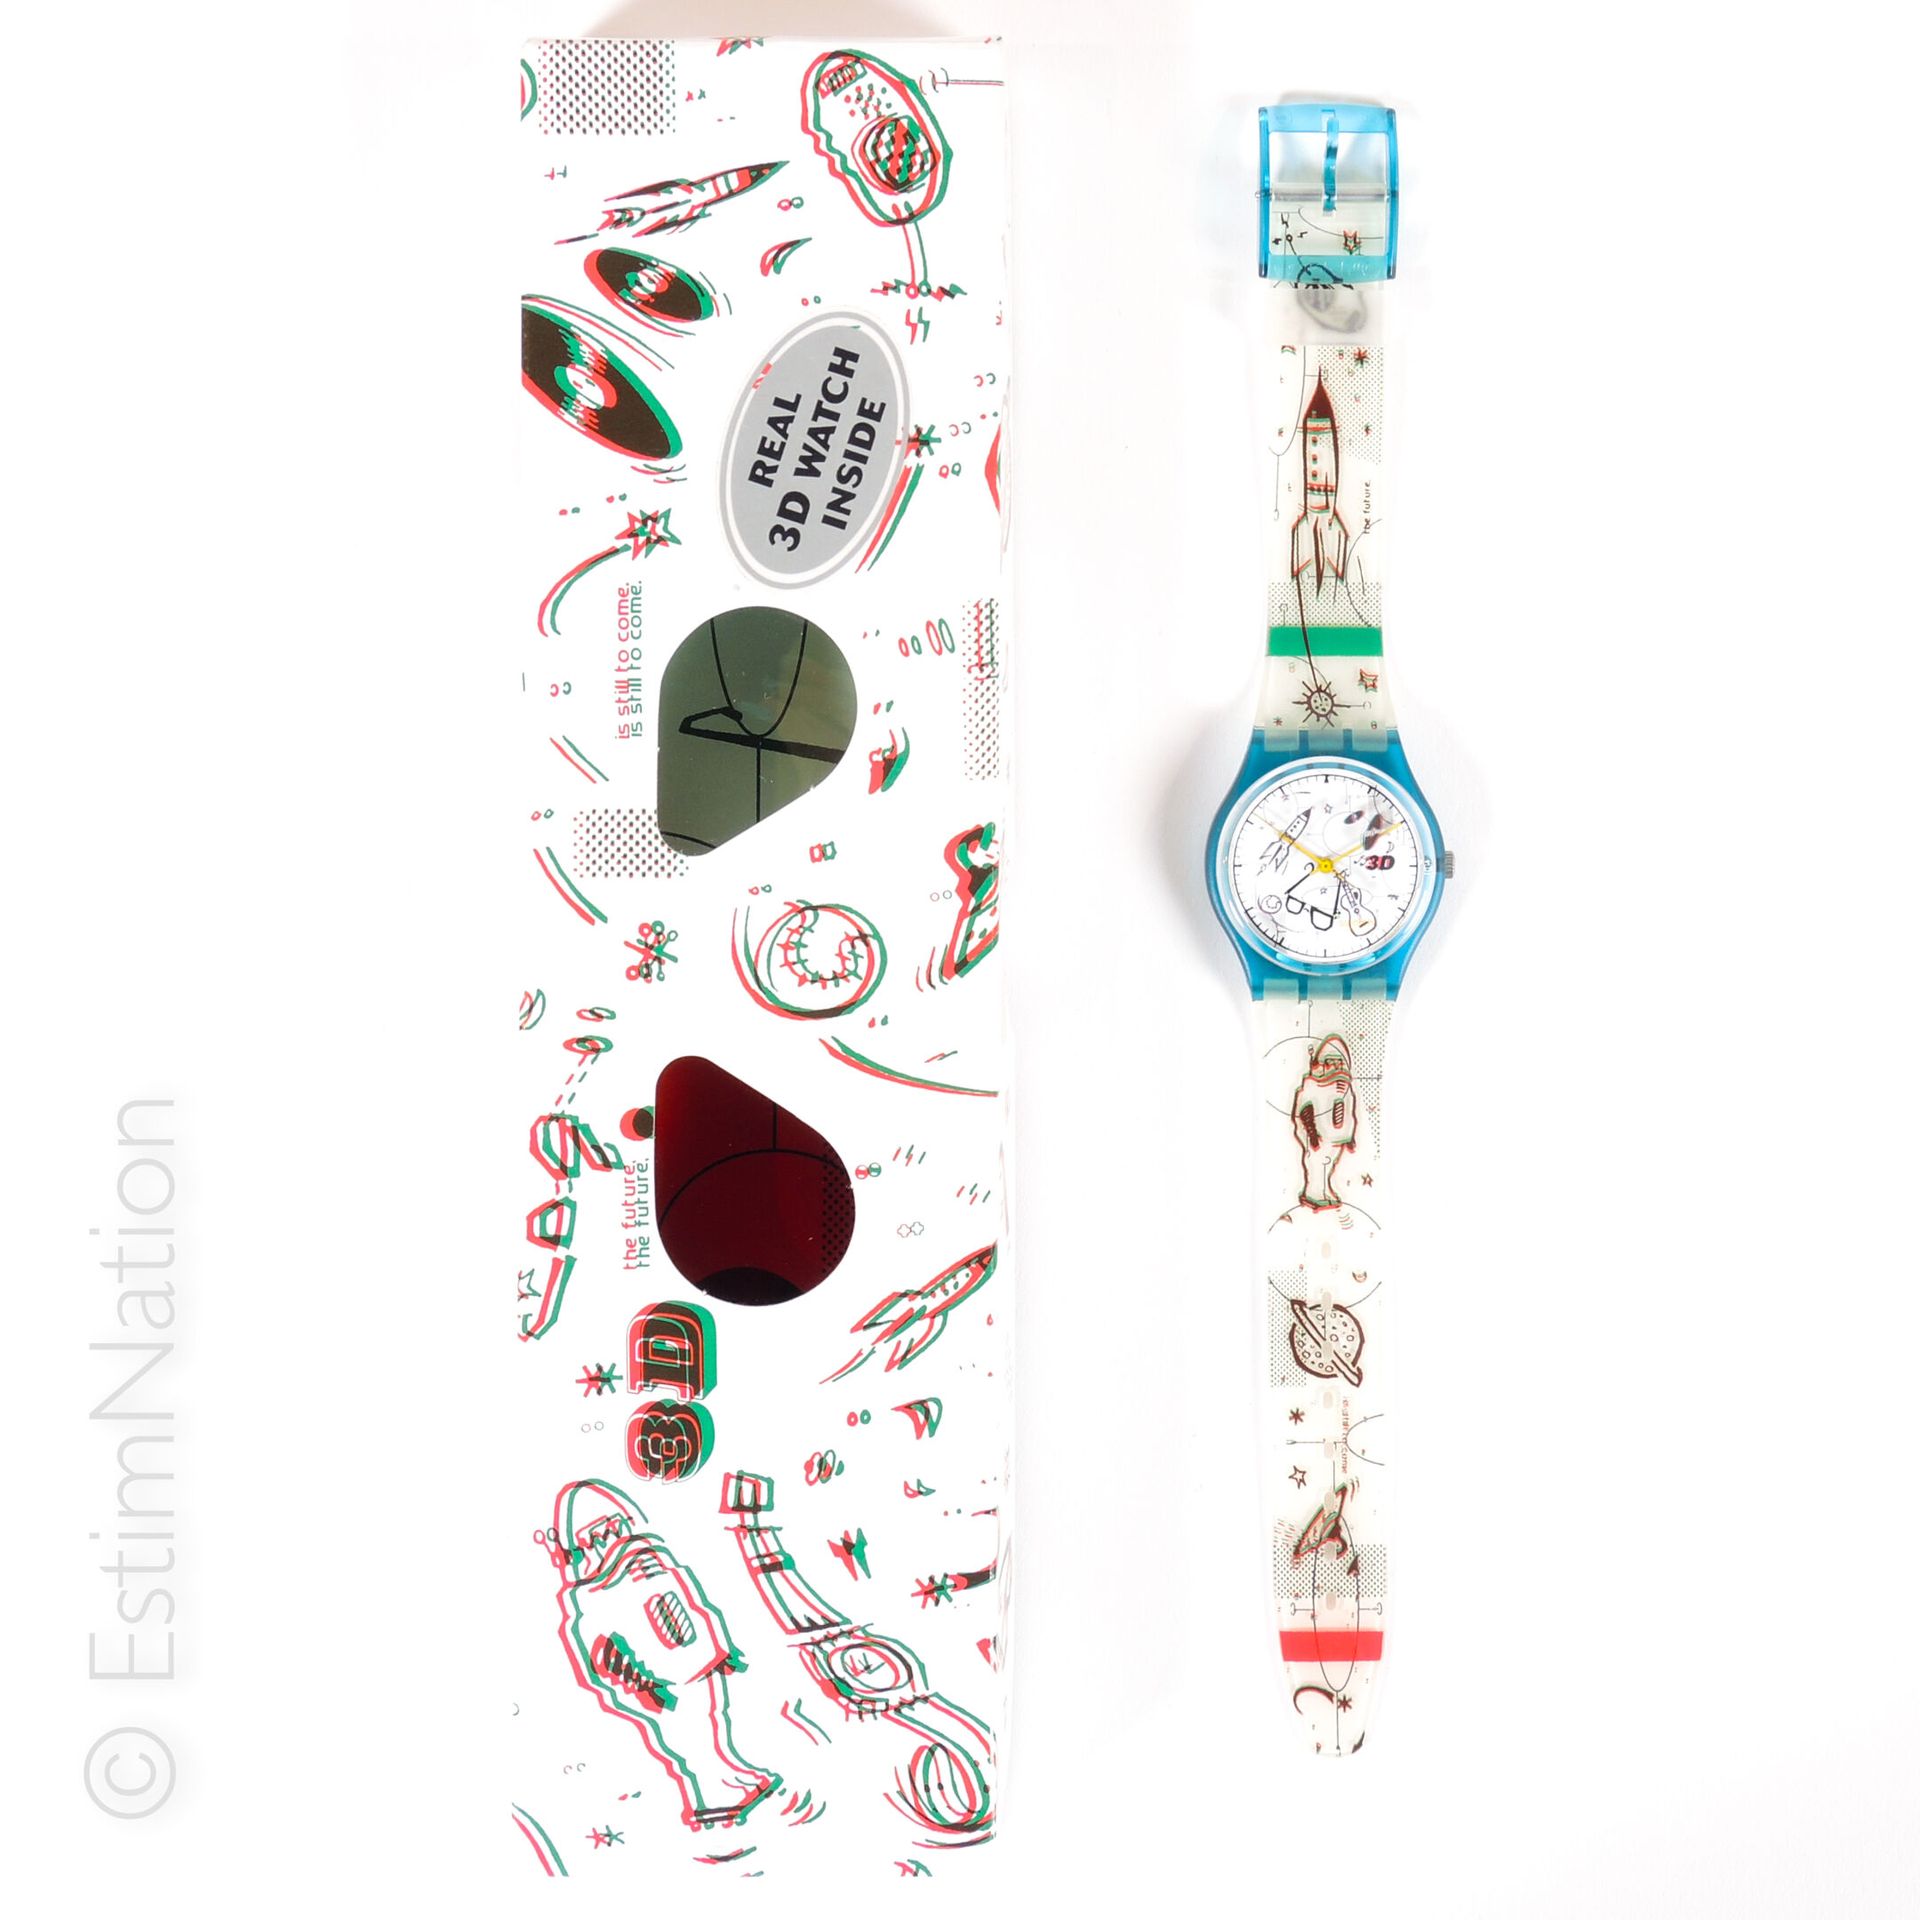 SWATCH - 3D EXPERIENCE - 1996 SWATCH - 3D EXPERIENCE

The Originals : Gent



Sp&hellip;